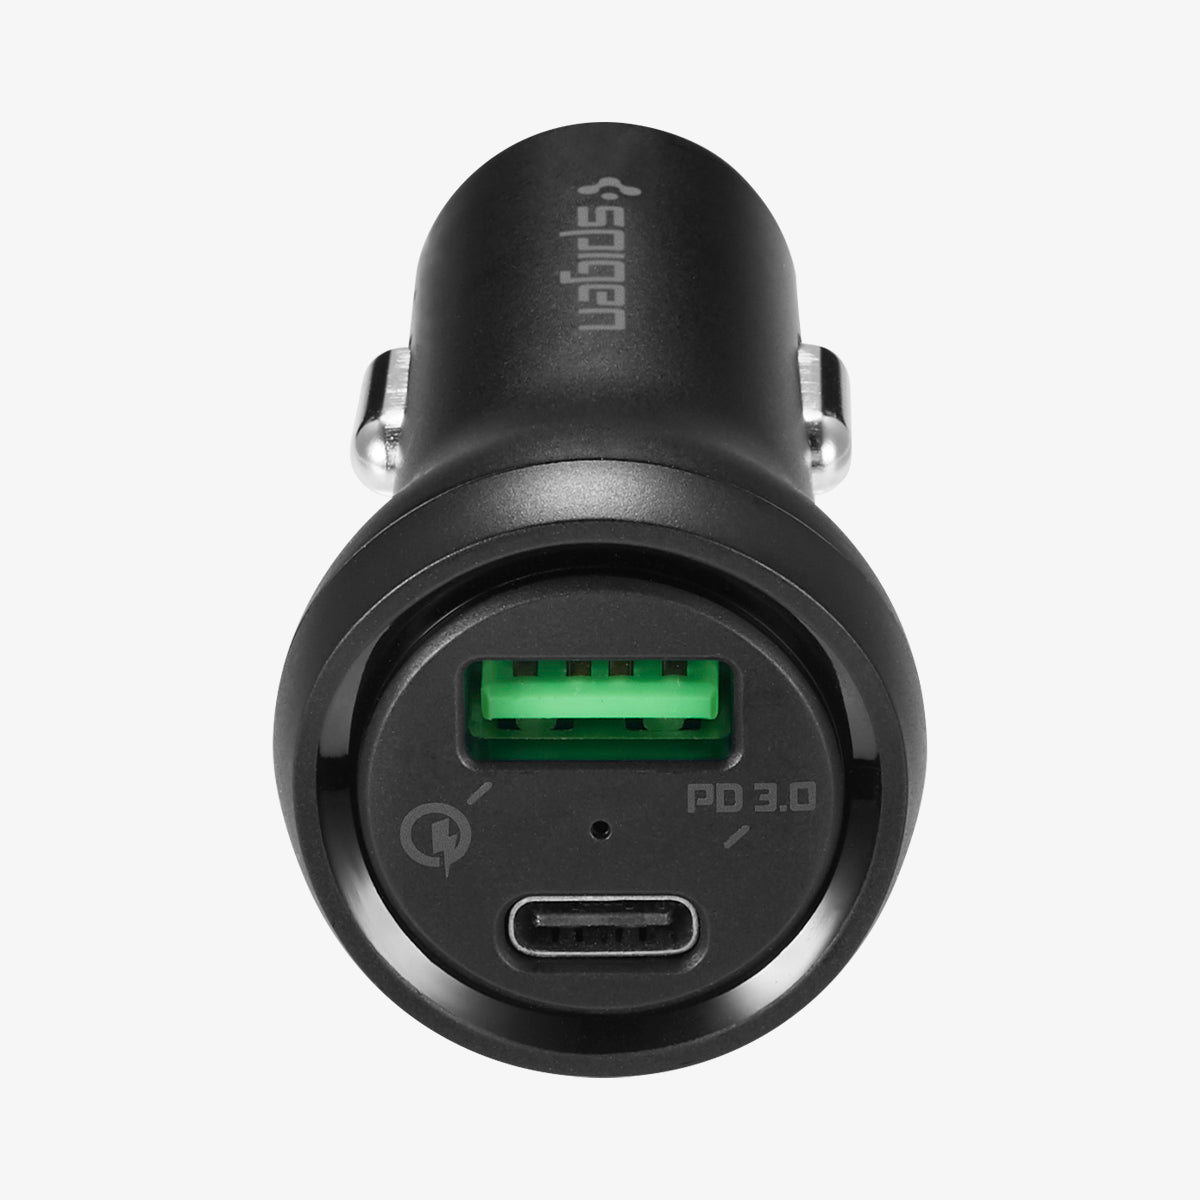 000CP25597 - SteadiBoost™ USB-C PD3.0 Car Charger showing the top and front